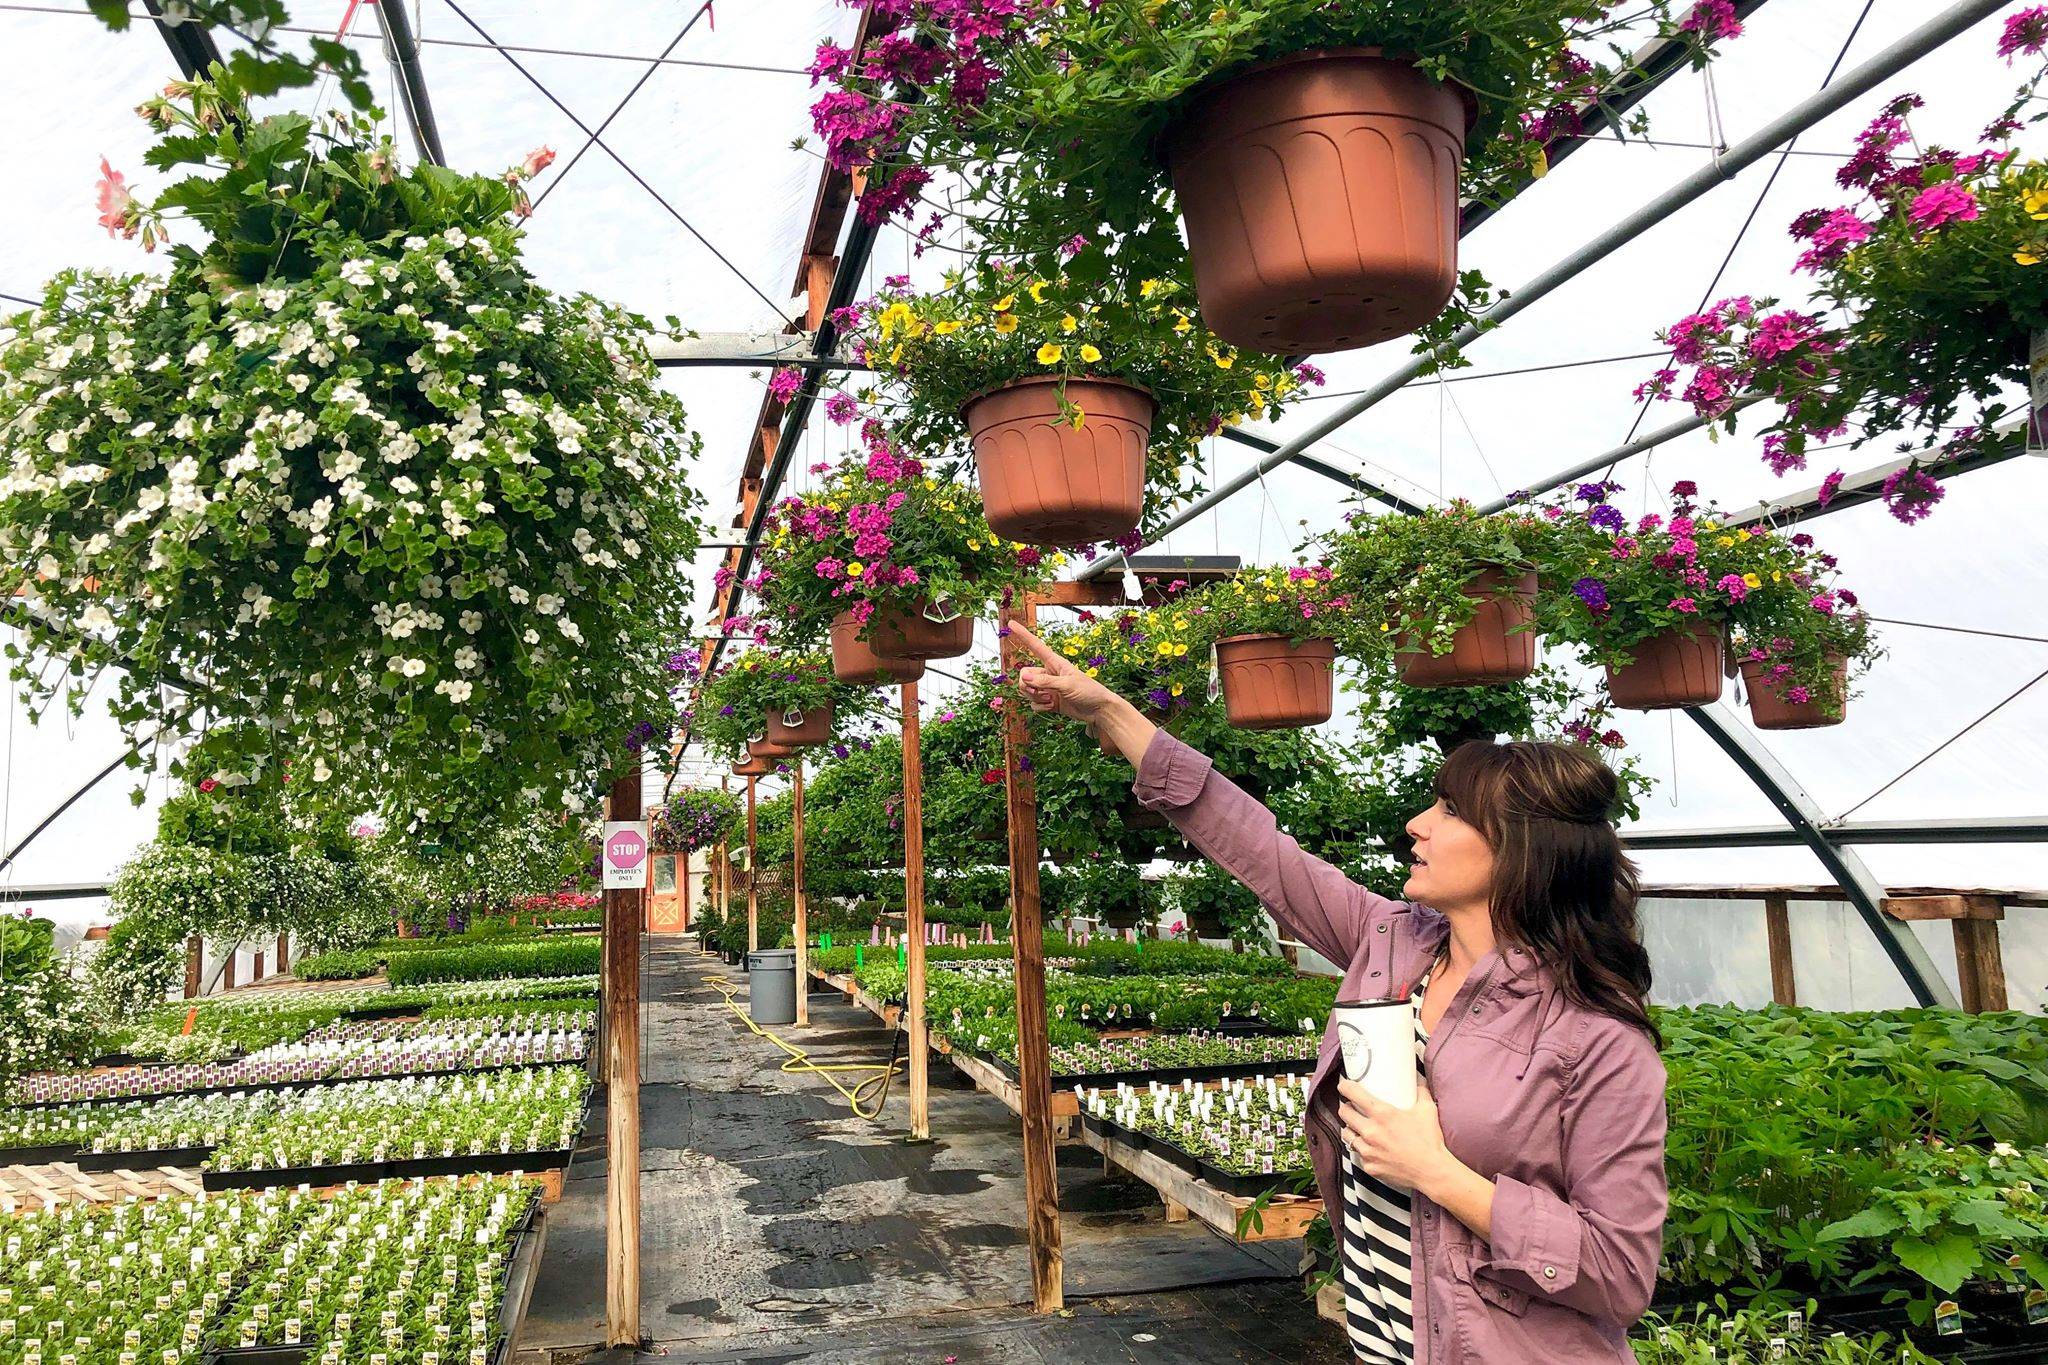 Jessica Henry points to one of the many flower baskets made at Trinity Greenhouse, which are some of the business’s bestsellers, on Monday, June 3, 2019, near Kenai, Alaska. (Photo by Victoria Petersen/Peninsula Clarion)